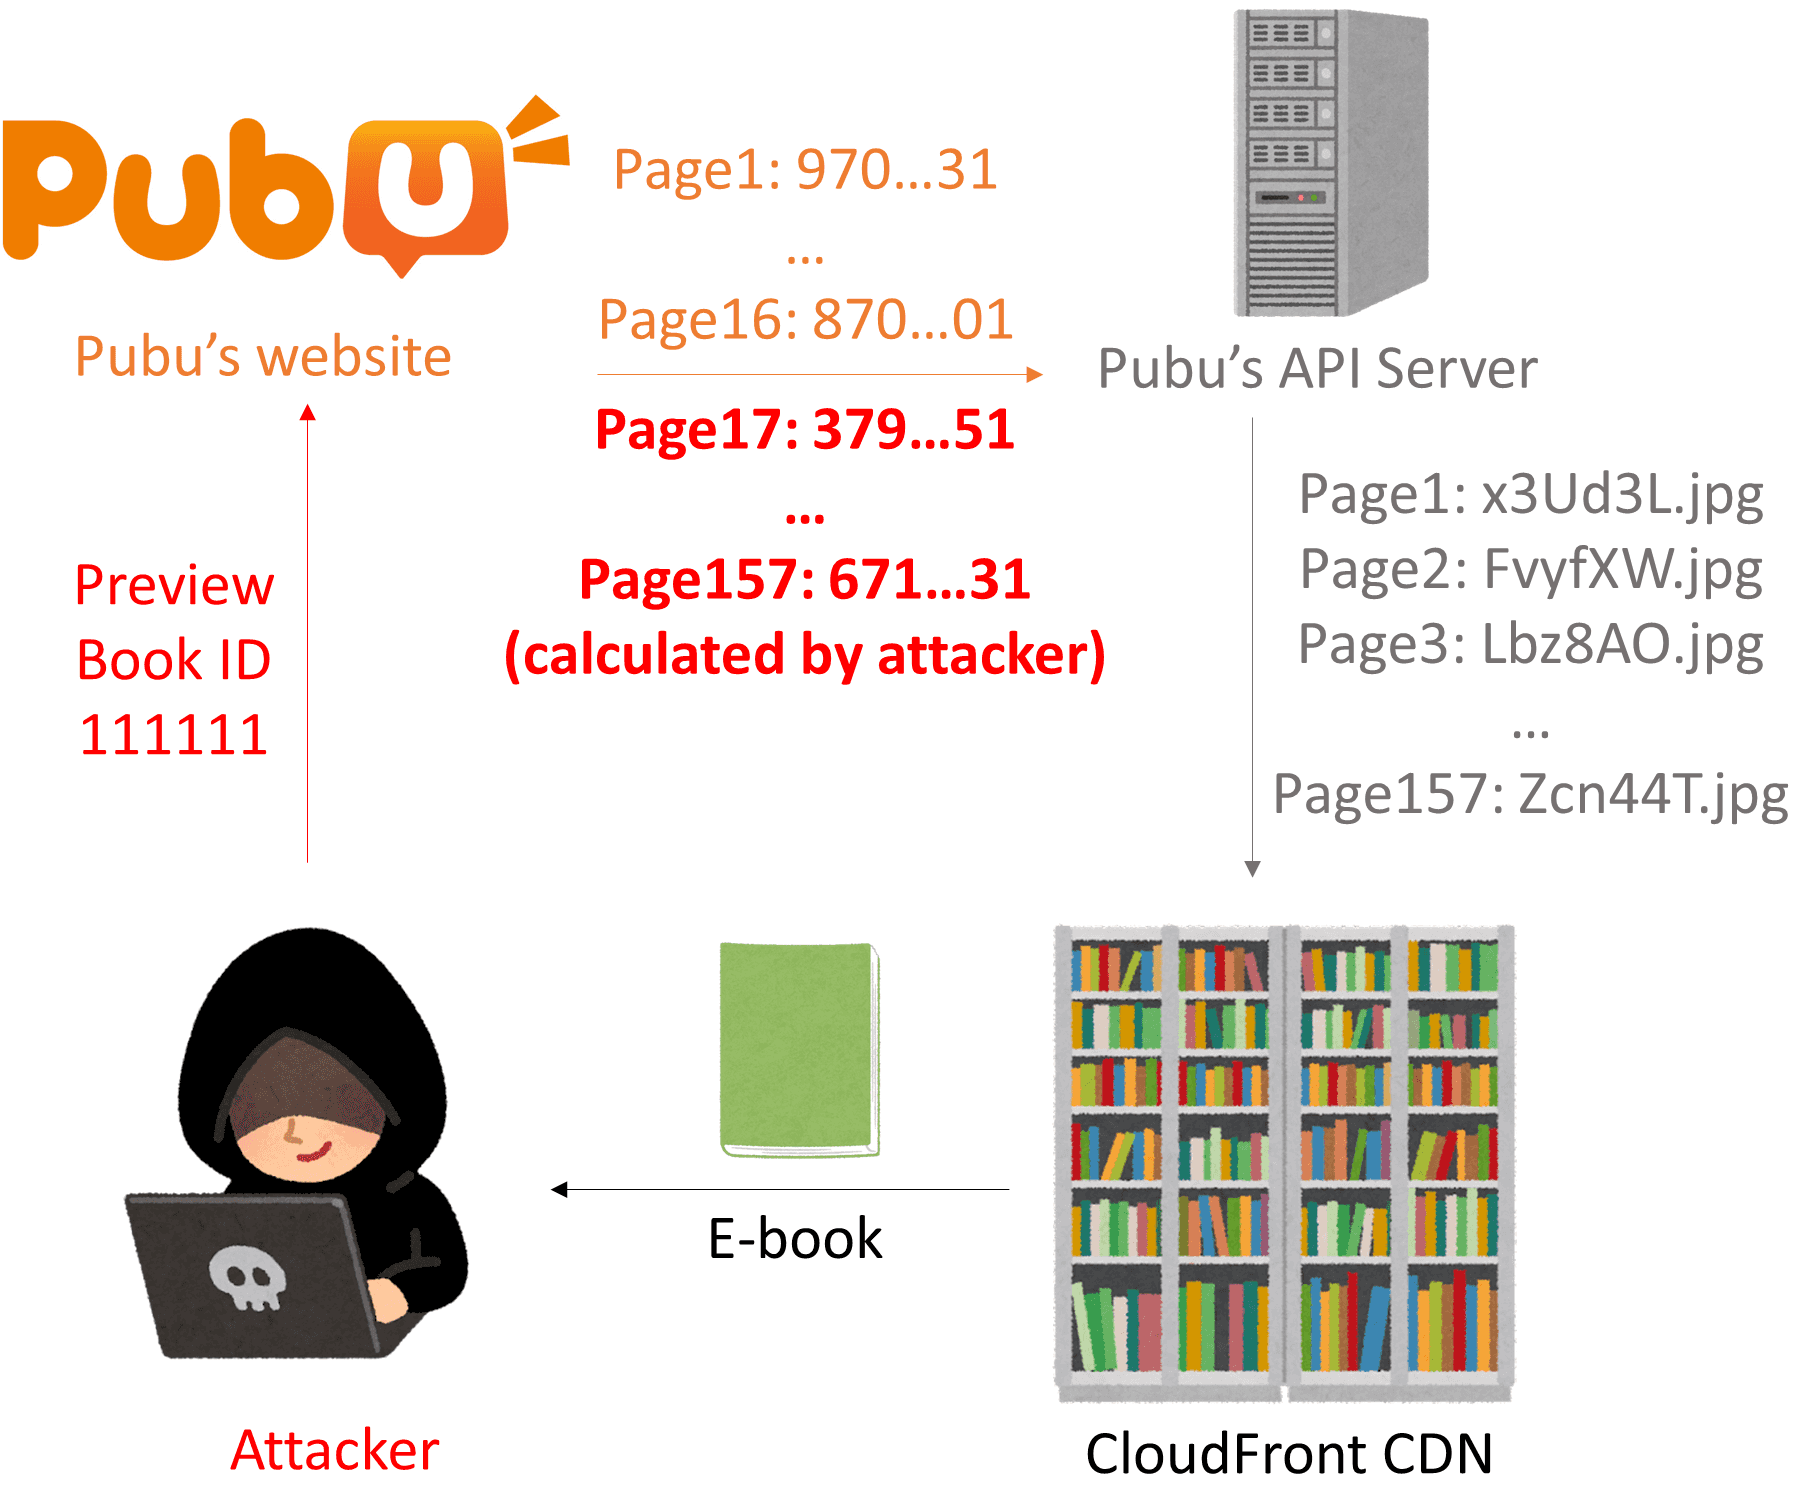 An attacker steals a book by calculating the page IDs of a book.